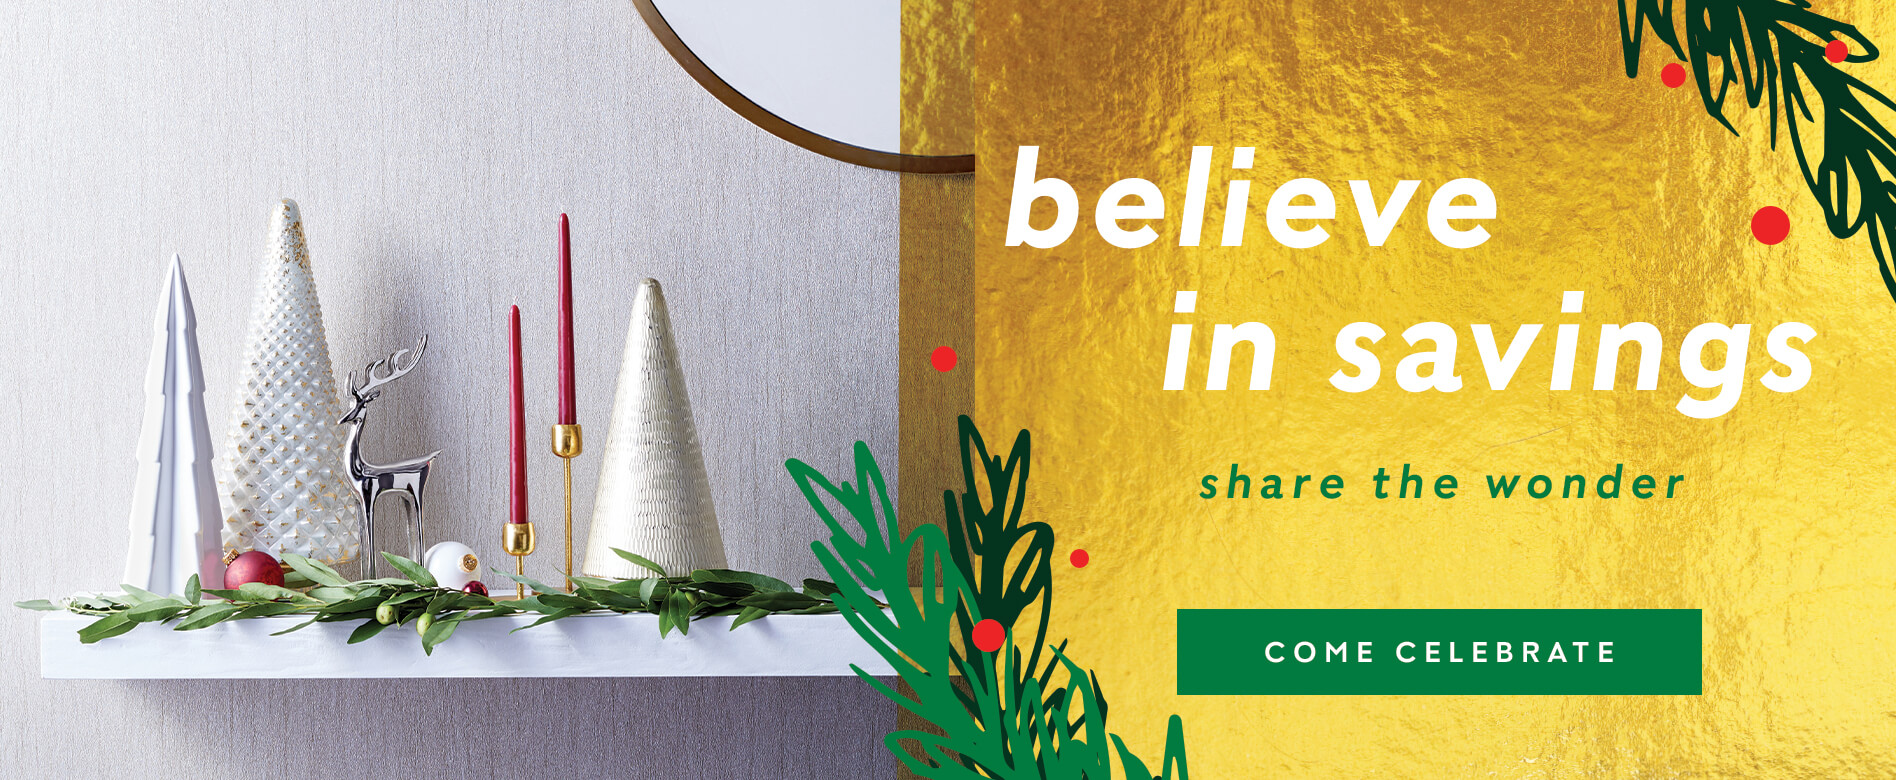 Believe in savings, share the wonder. Come celebrate!